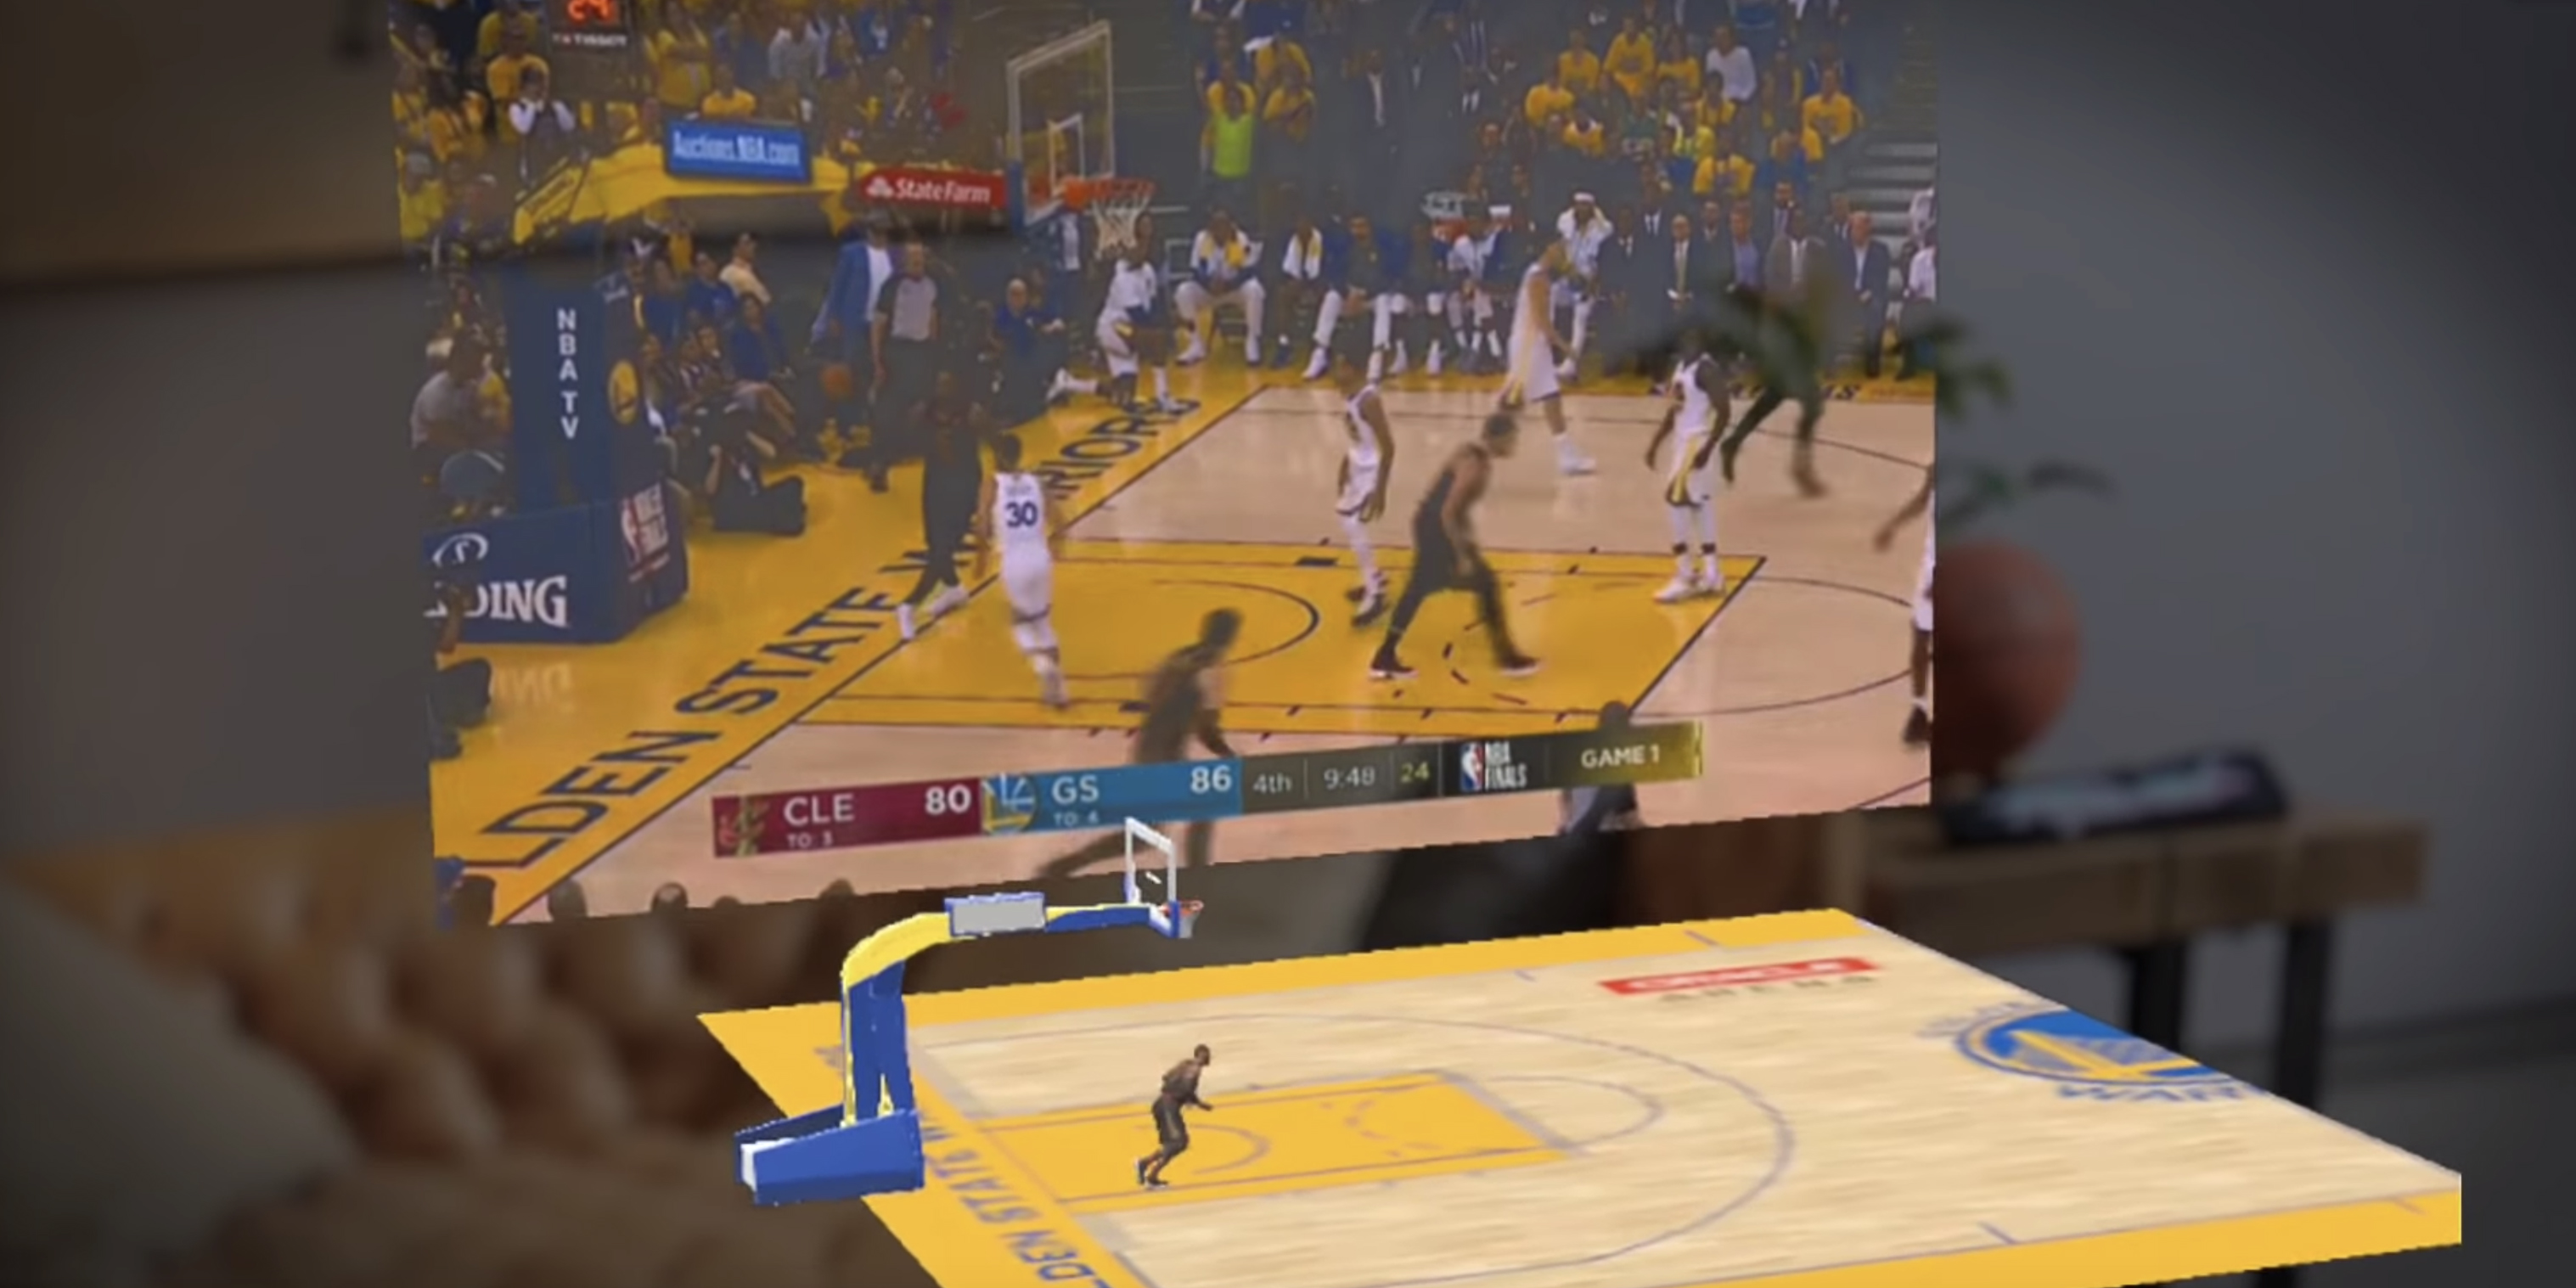 The Magic Leap NBA App hits with a fully immersive experience